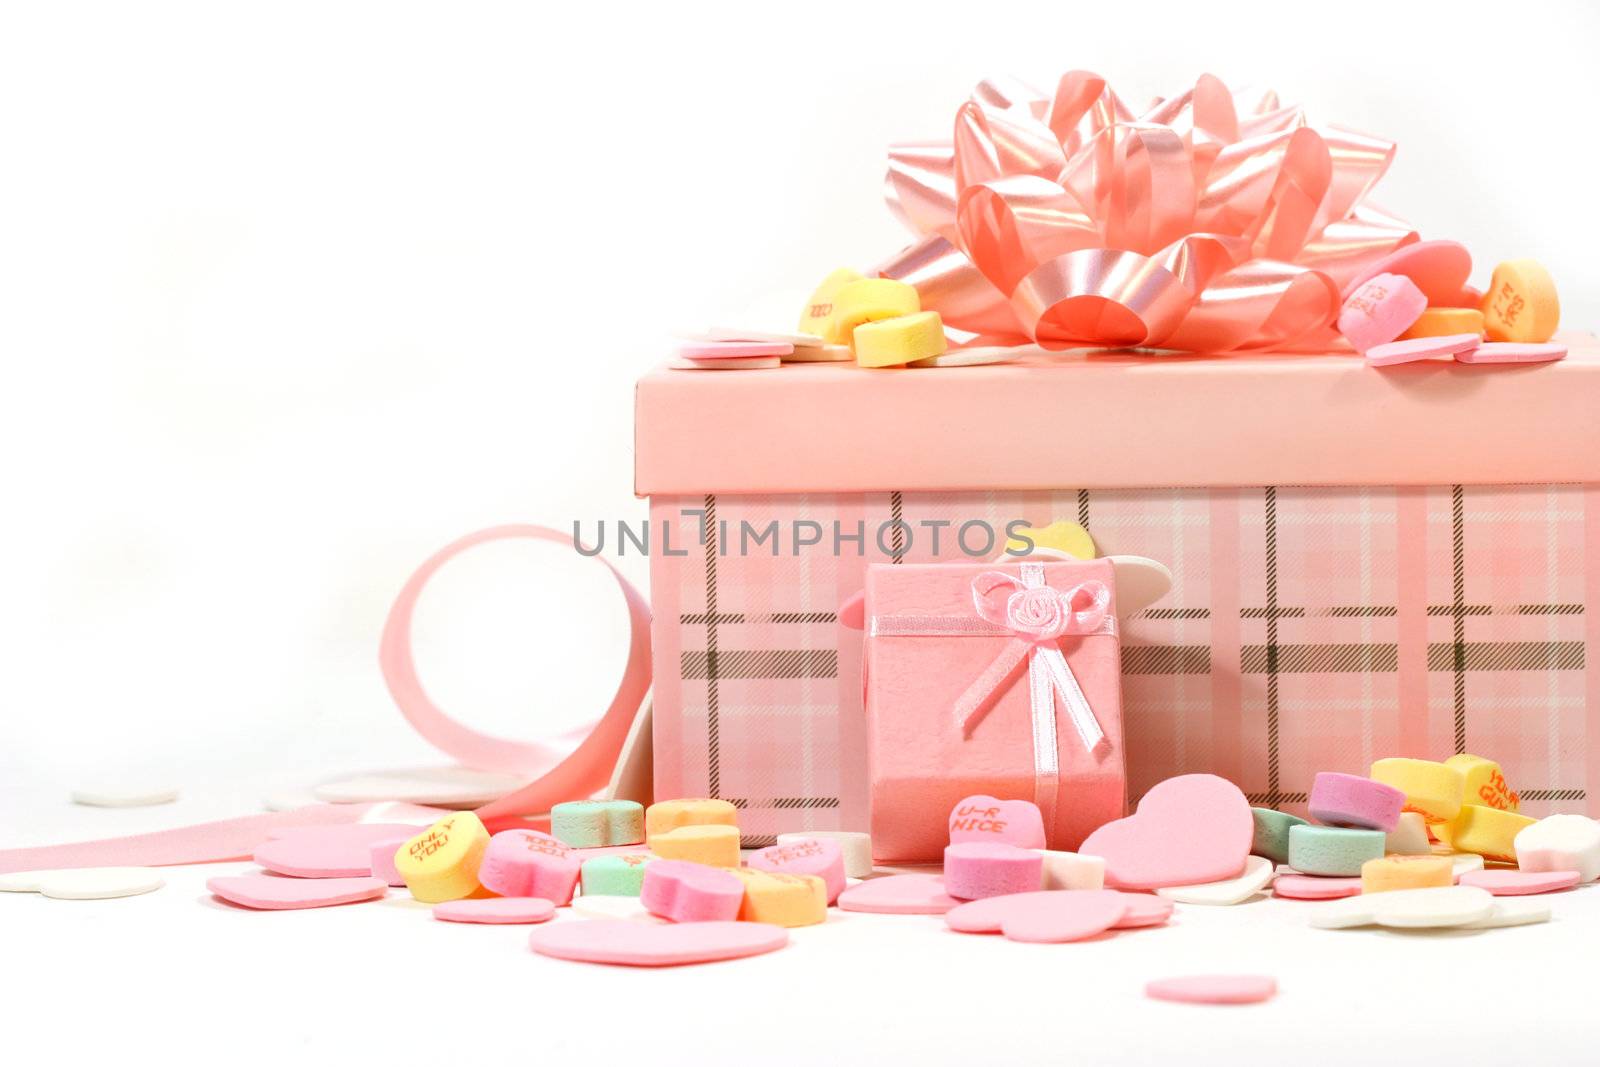 Gifts and candies for Valentine's Day by Sandralise